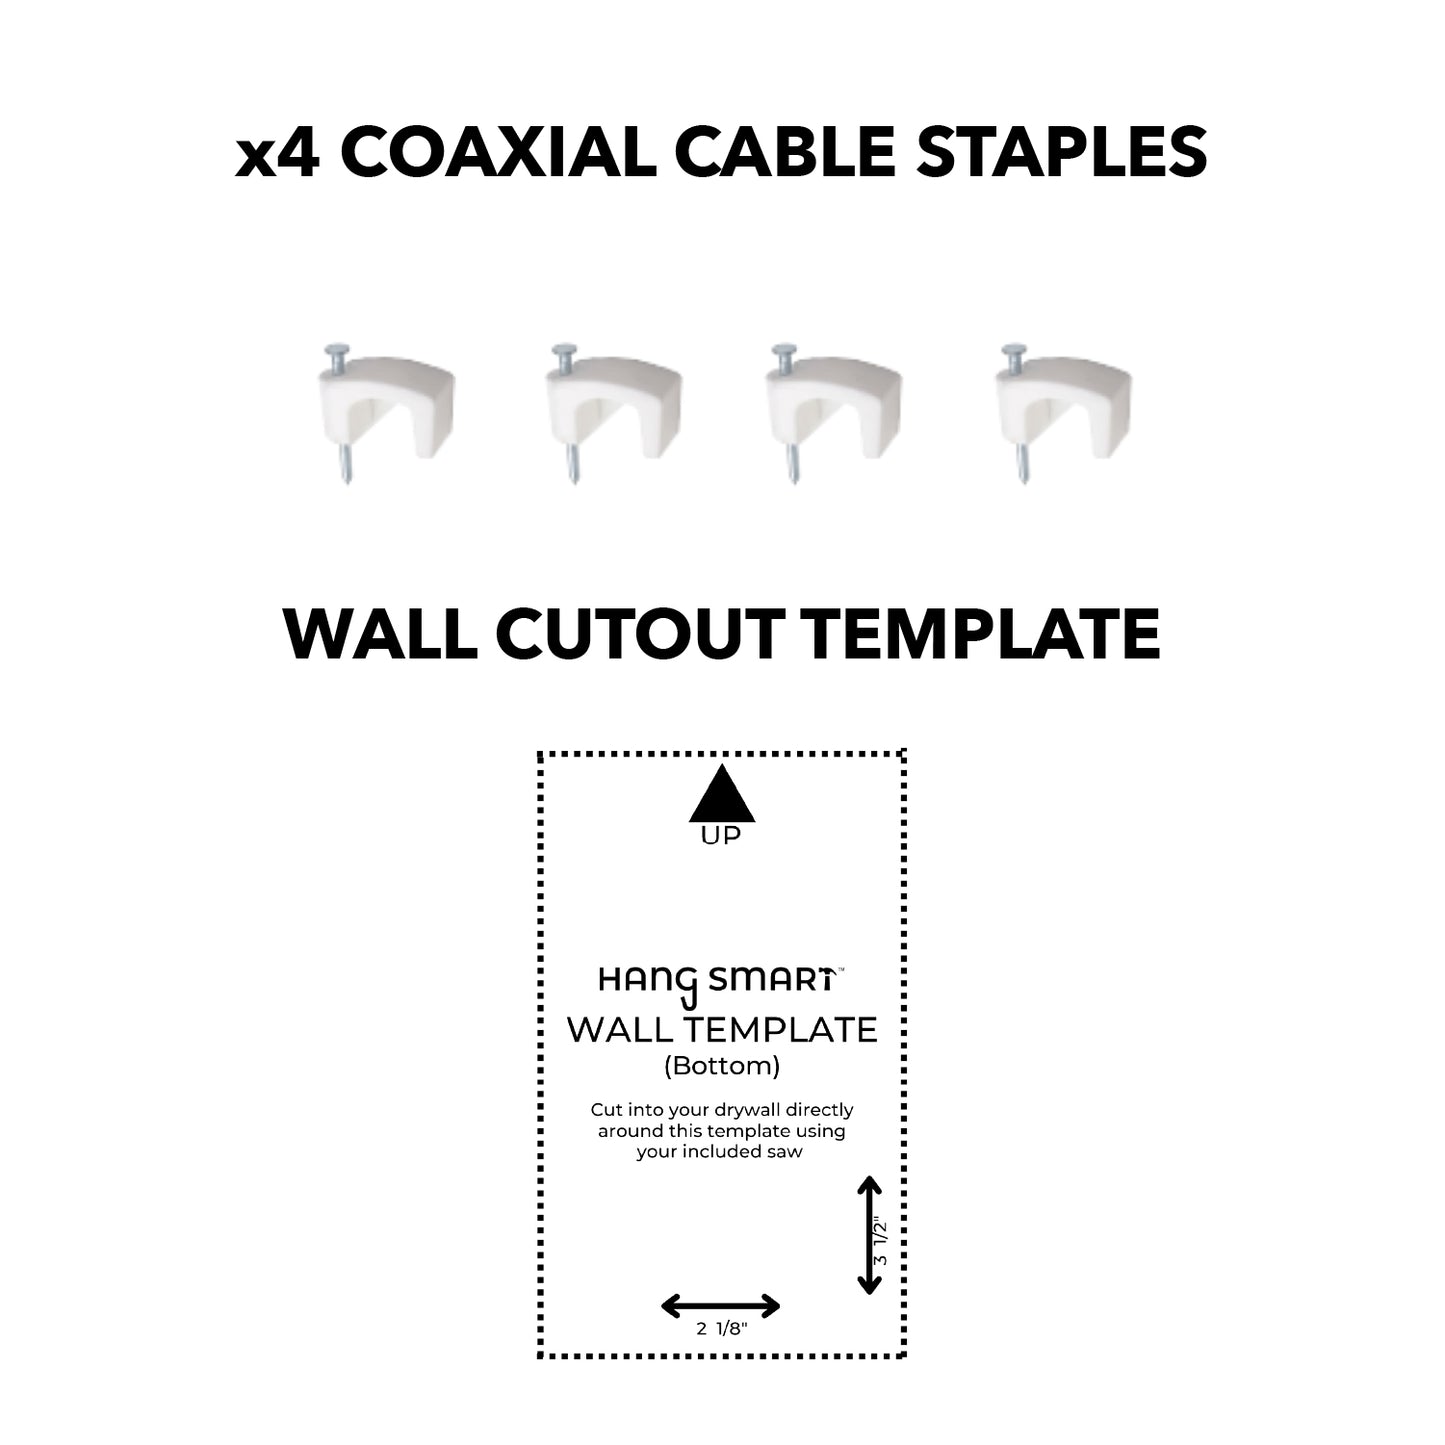 4 coaxial cable staples and wall cutout template for wire concealer wall plates